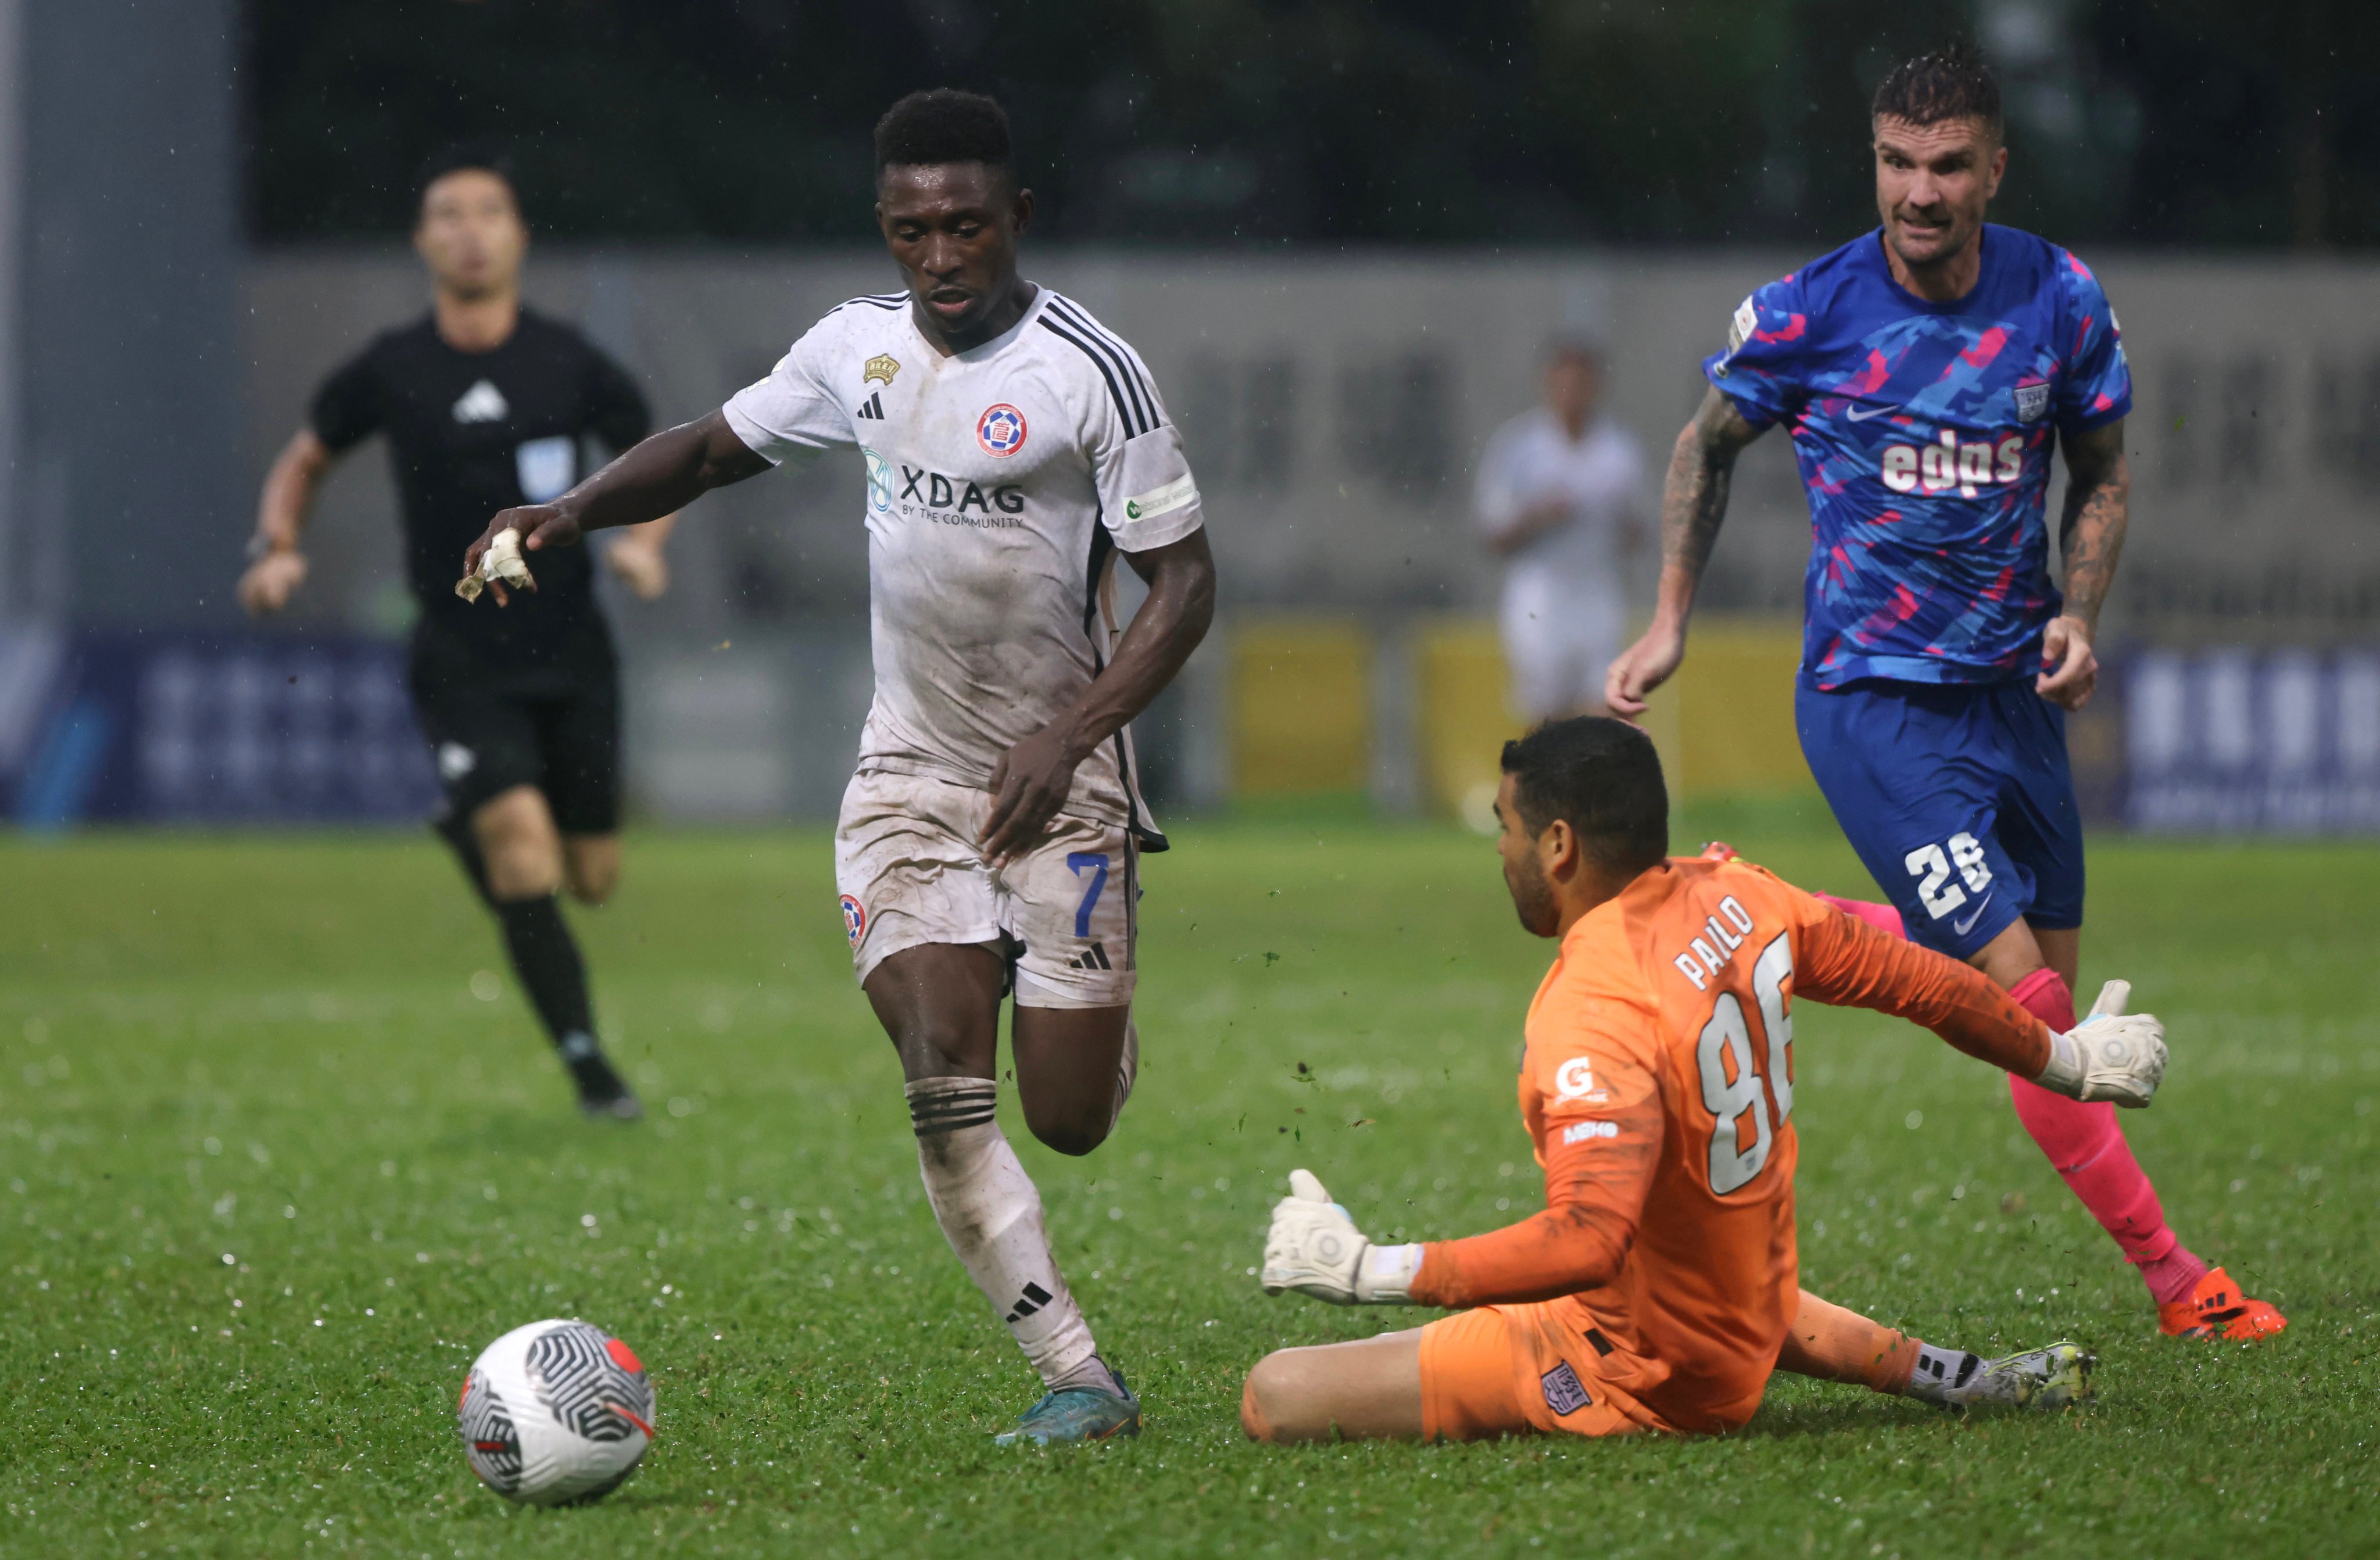 Noah Baffoe of Eastern rounds goalkeeper Paulo Cesar to score the goal that knocked Kitchee out of the FA Cup. Photo: Jonathan Wong